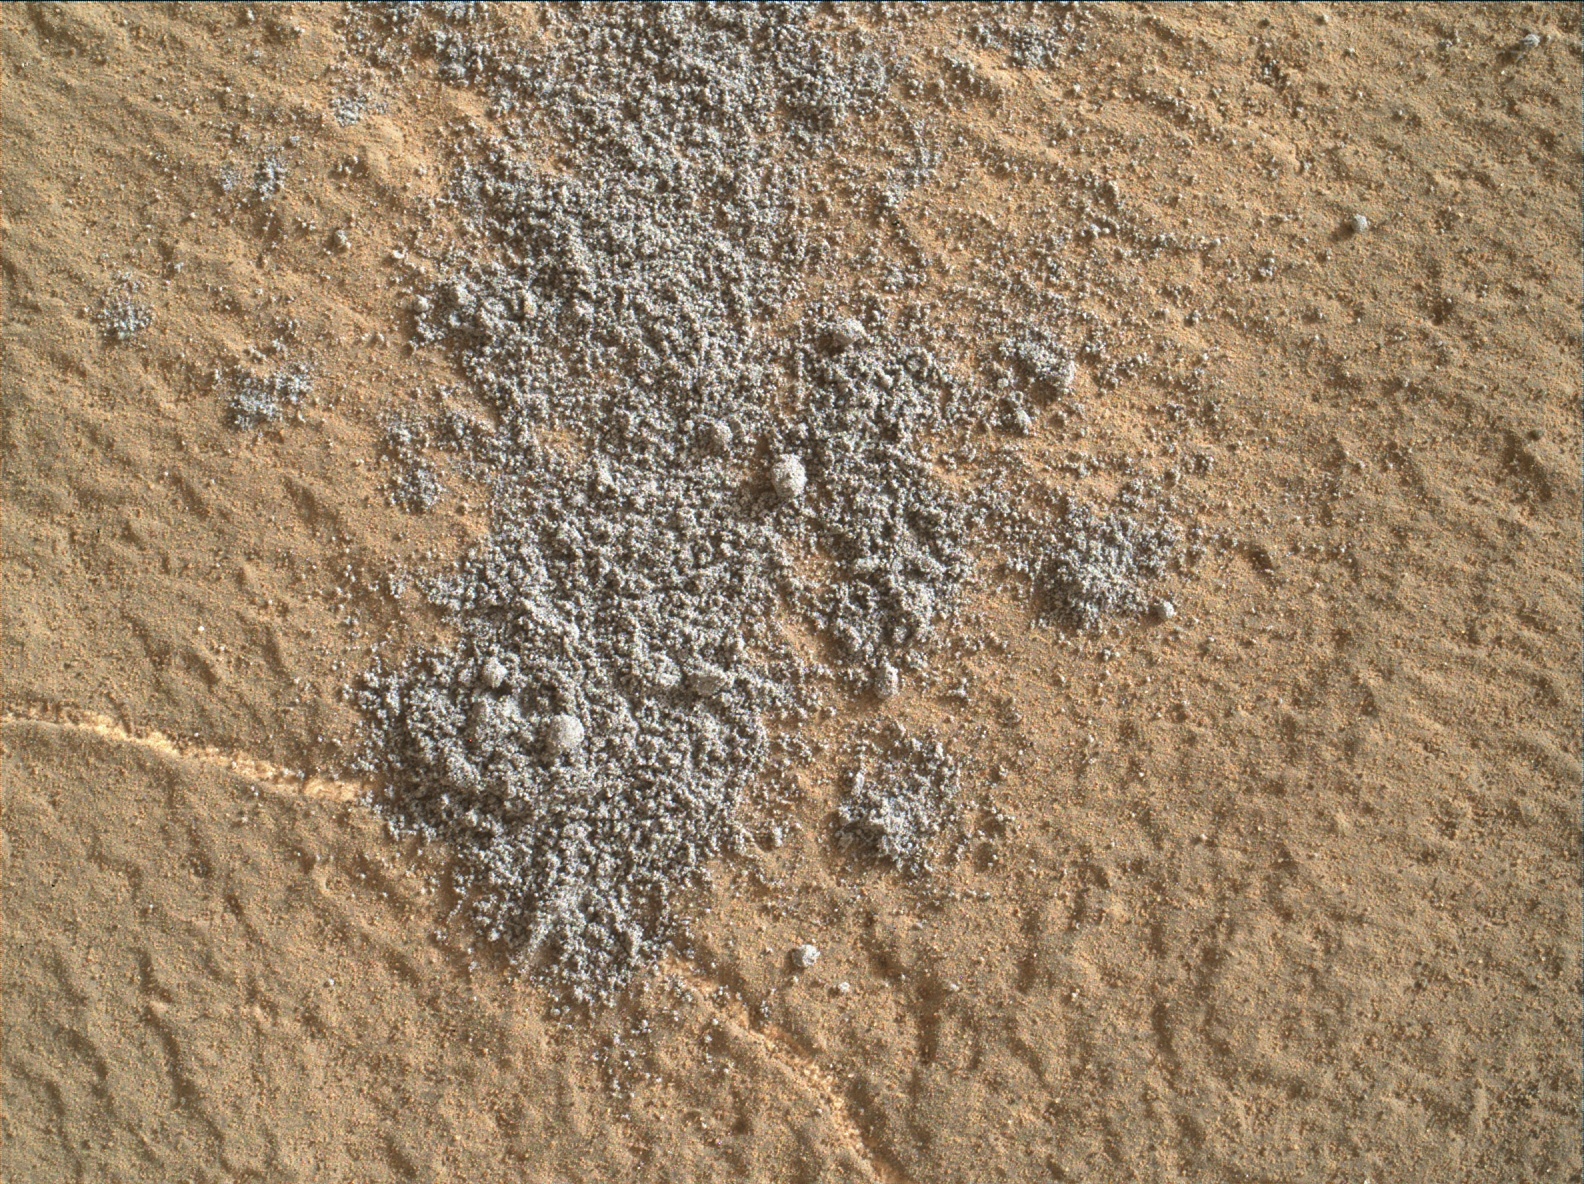 Nasa's Mars rover Curiosity acquired this image using its Mars Hand Lens Imager (MAHLI) on Sol 1419